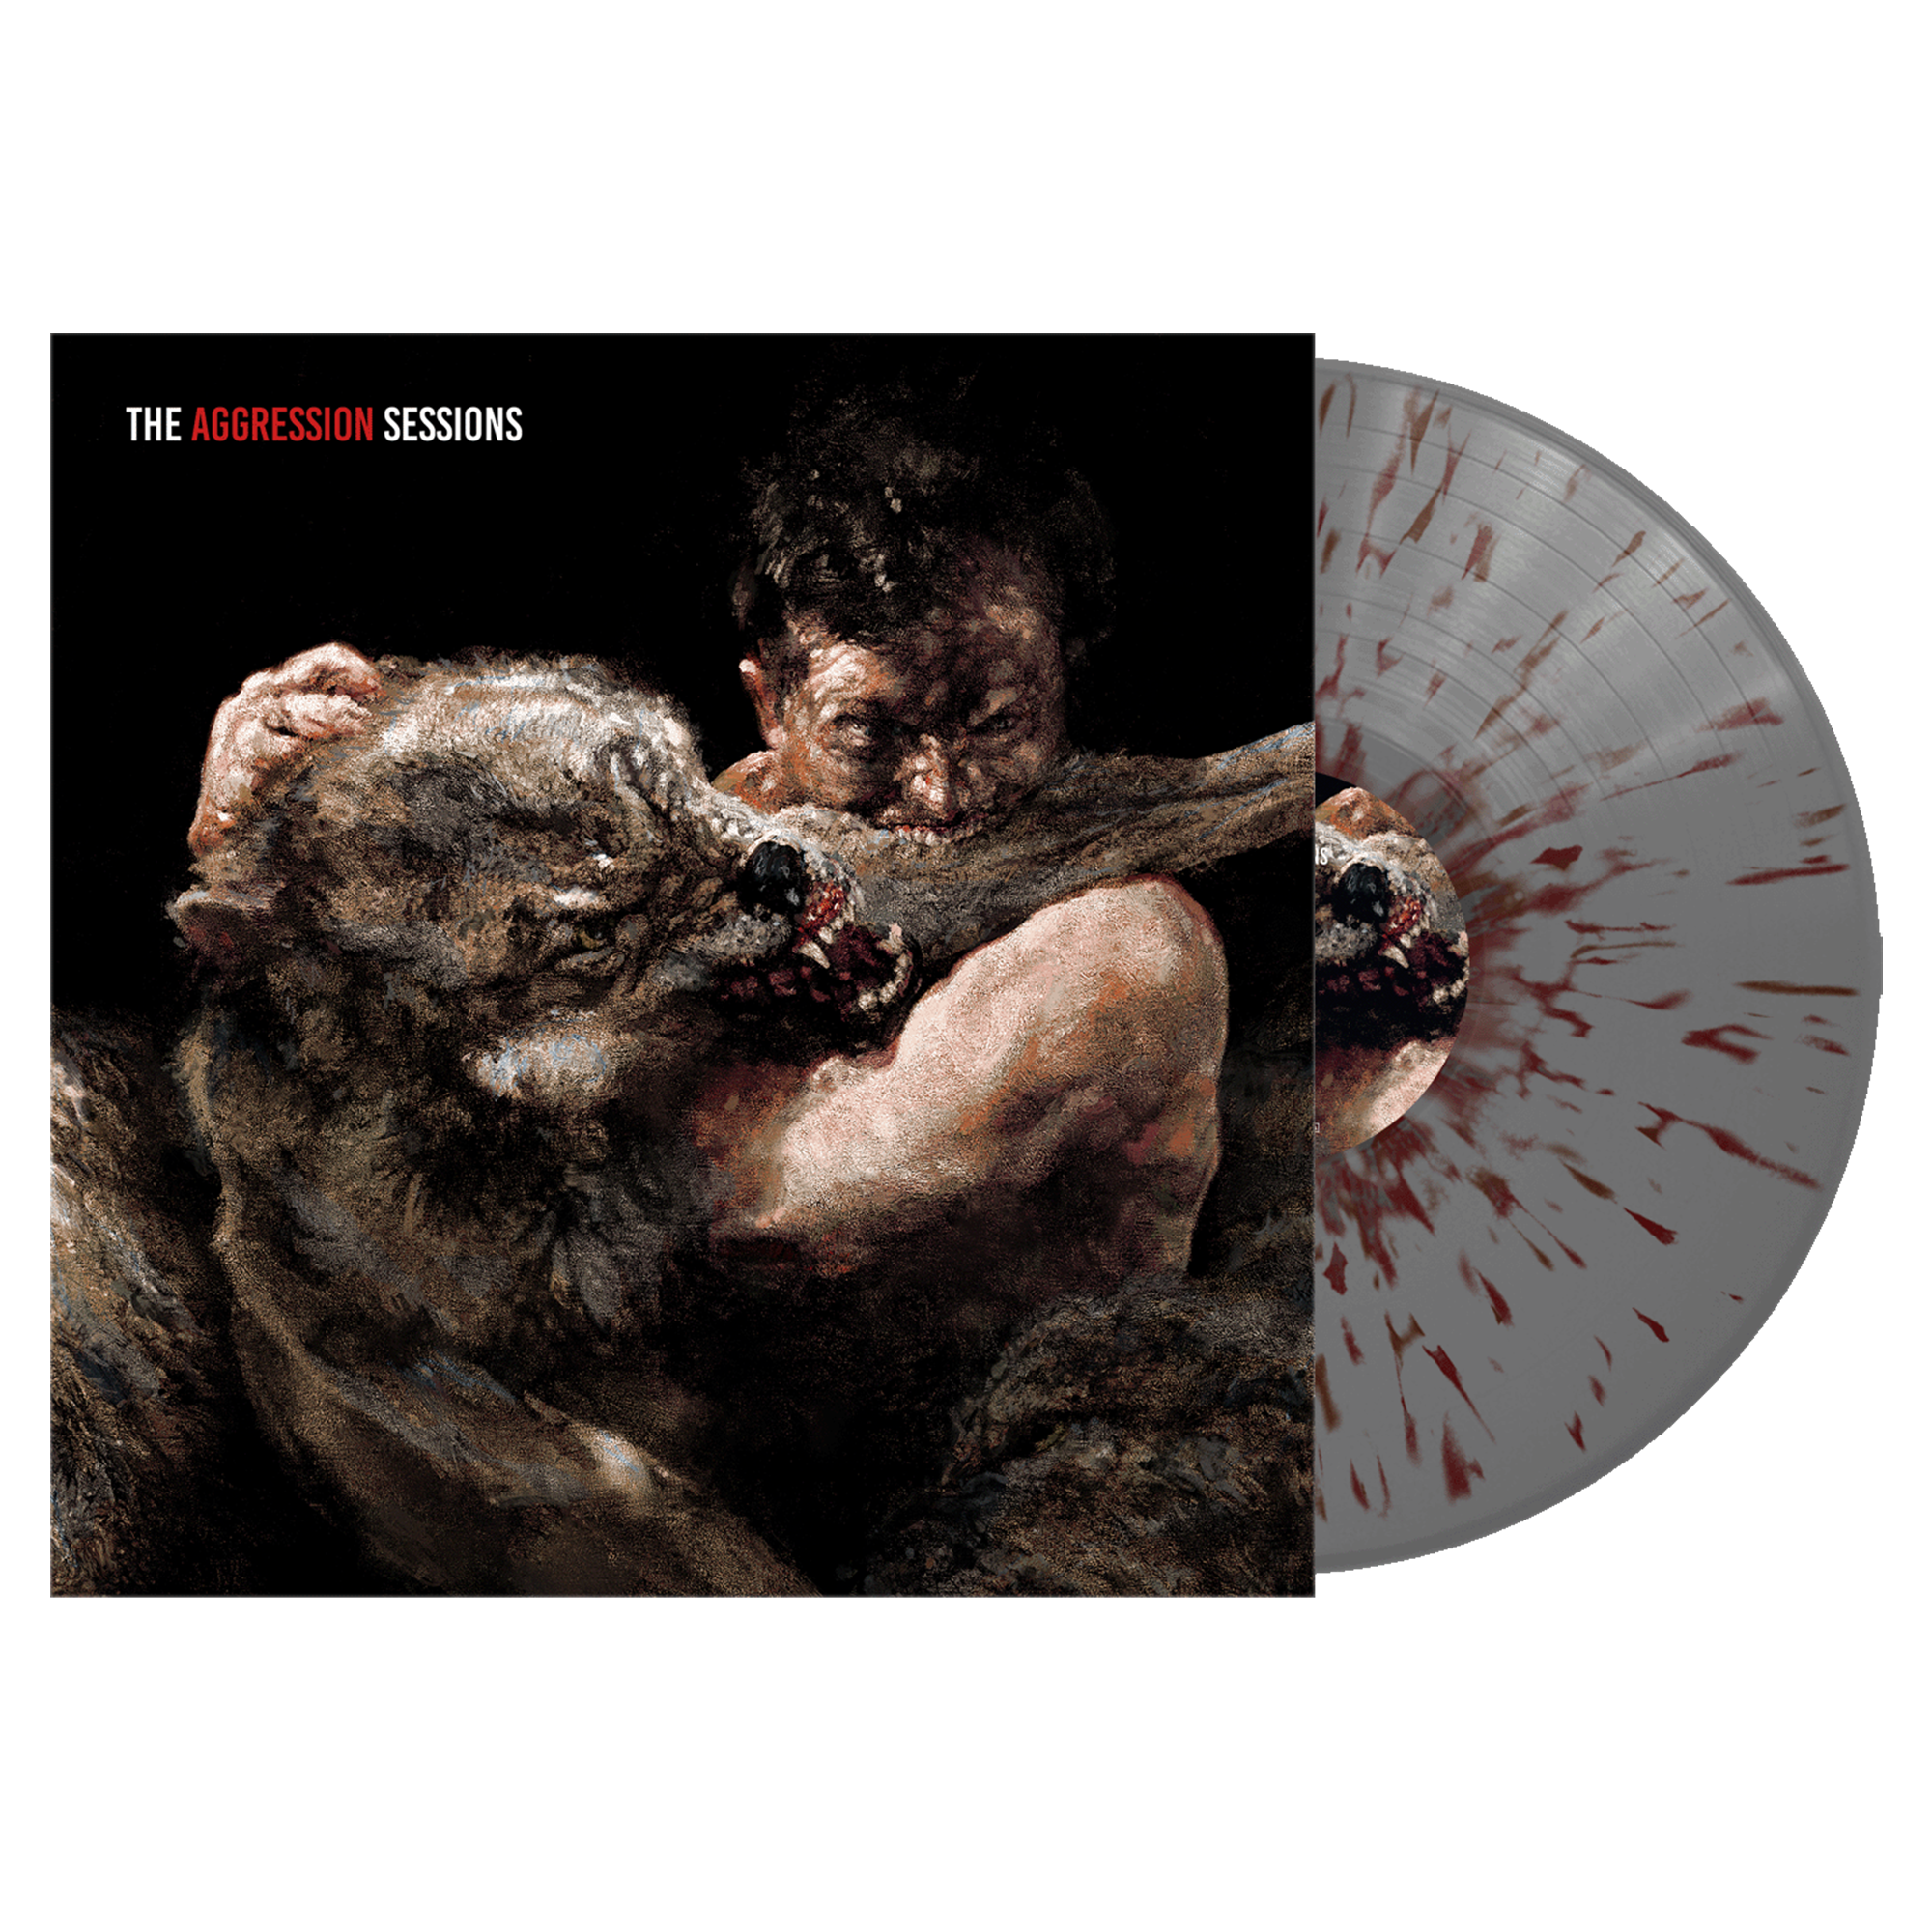 Malevolence - The Aggression Sessions LP + Hoodie Bundle